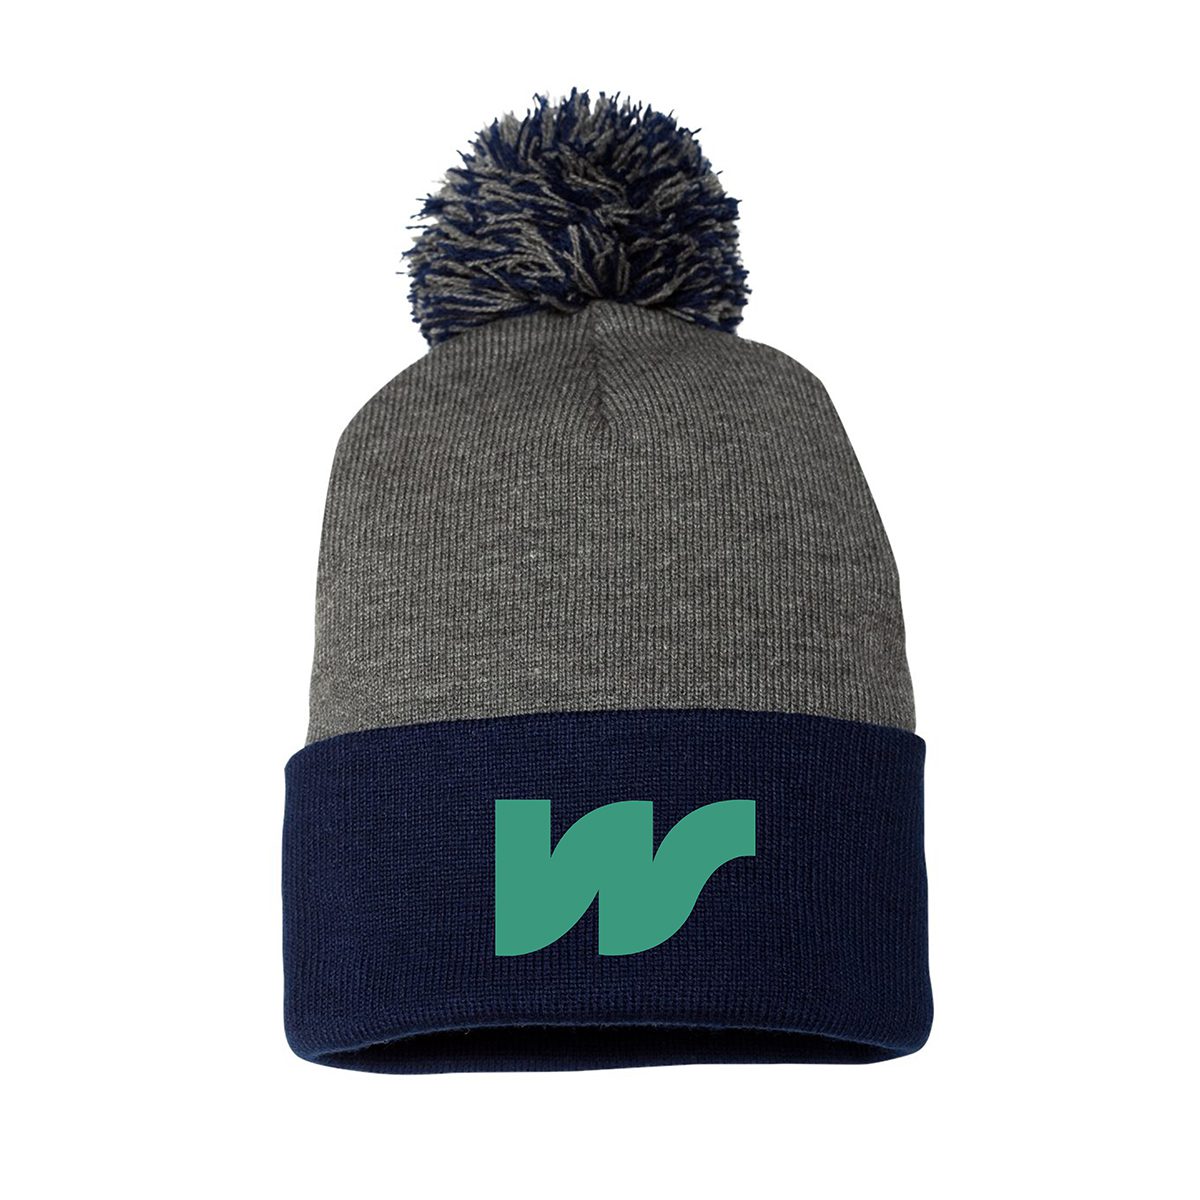 City-of-Welland-Merch-Store_V9-SP15-Front-Dark-Heather-Grey-and-Navy-with-Vine-W